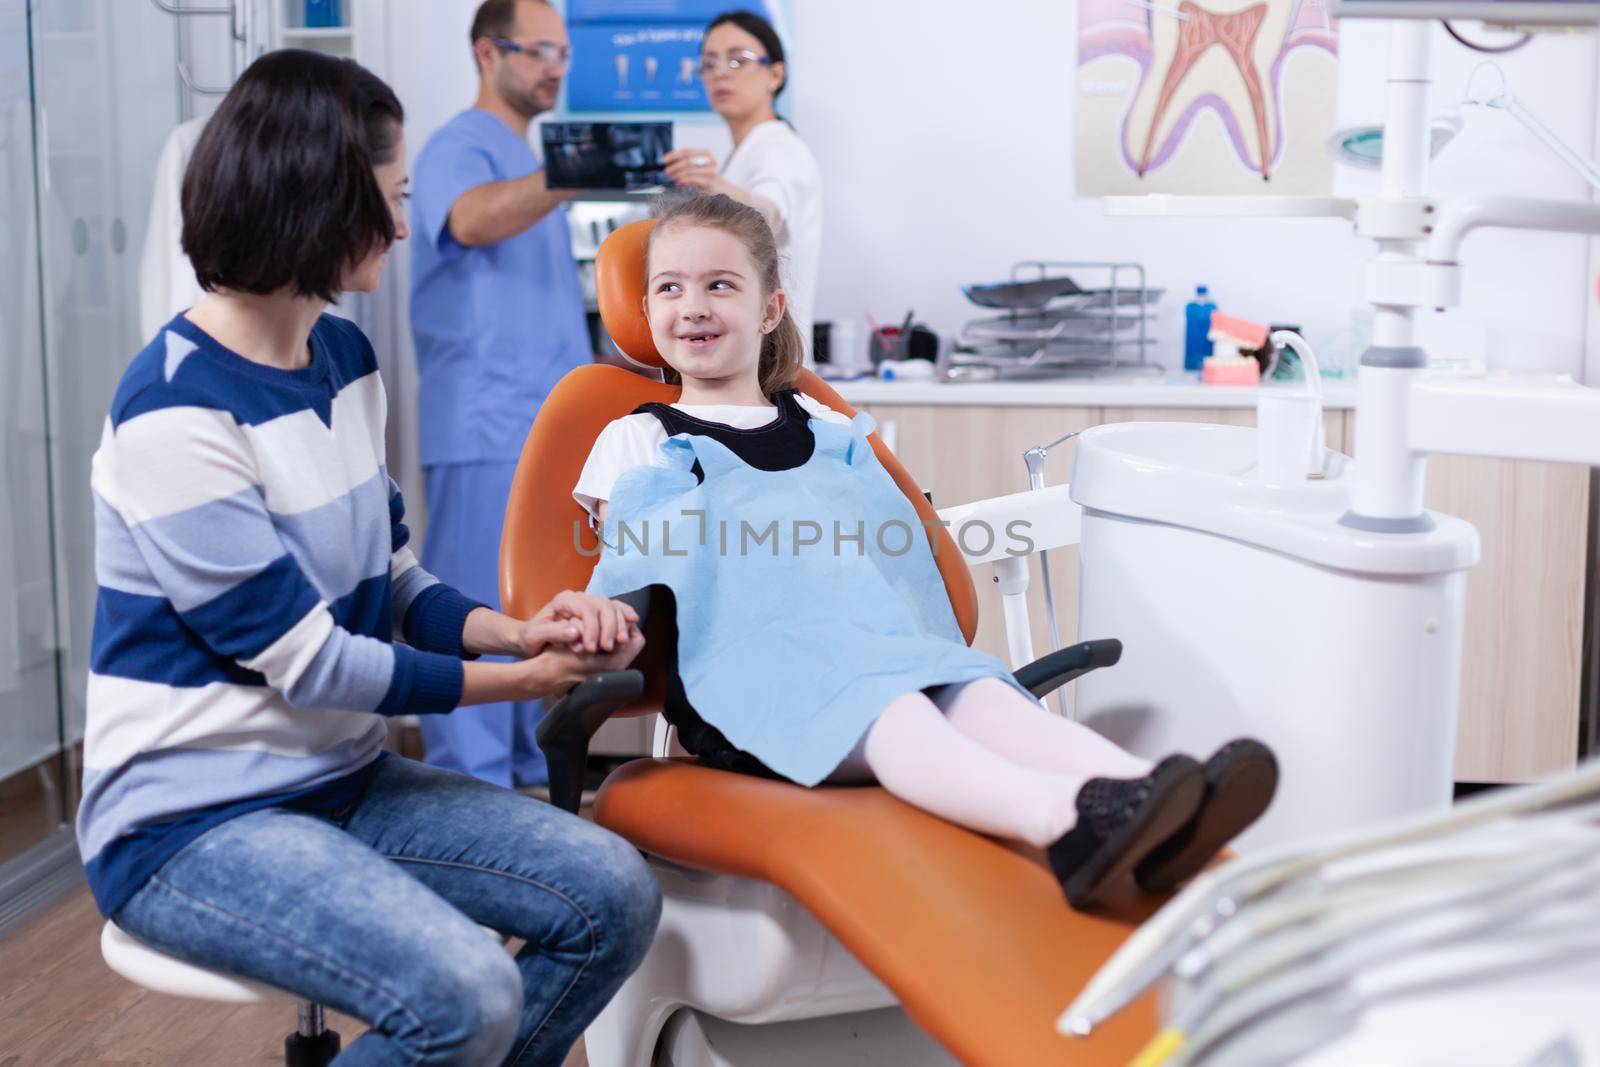 Little girl with missing tooth wearing dental bib waiting for examination by DCStudio